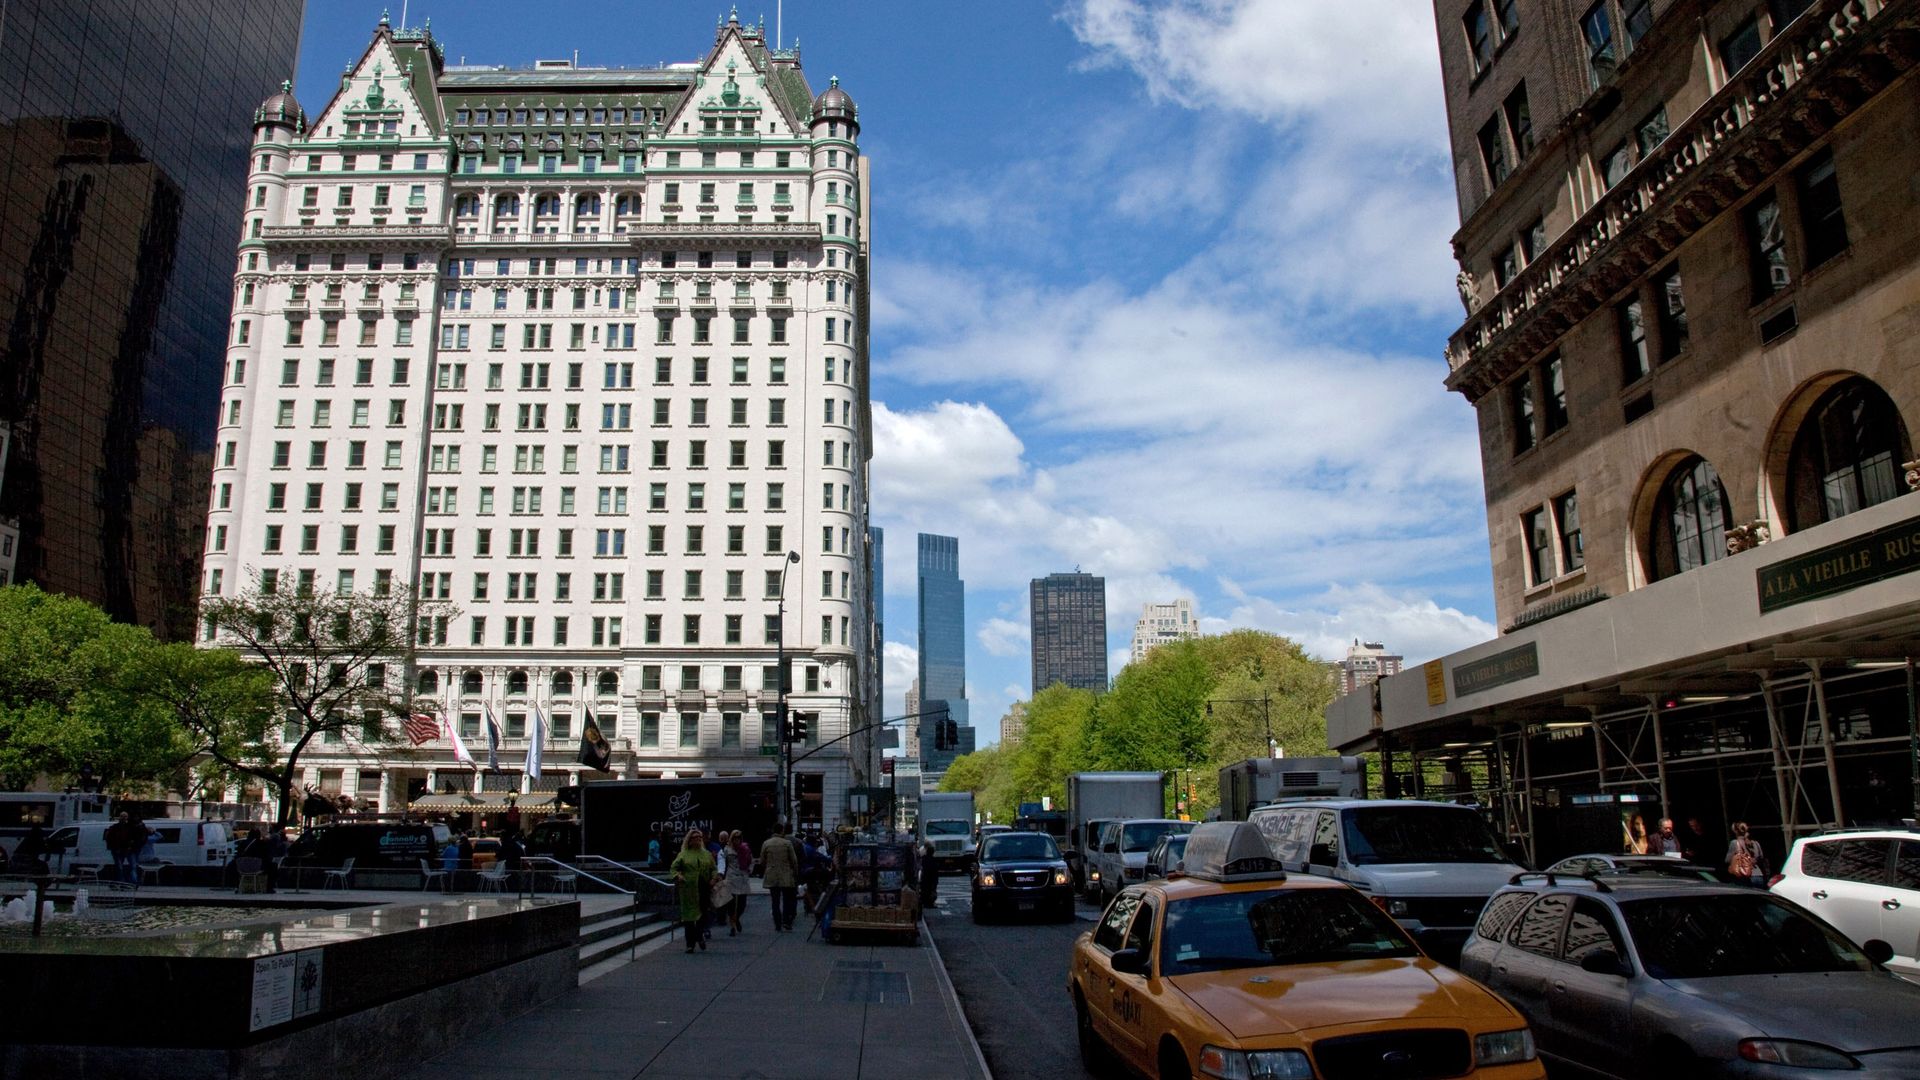 New York's Plaza Hotel, formerly owned by Trump, now belongs to Qatar